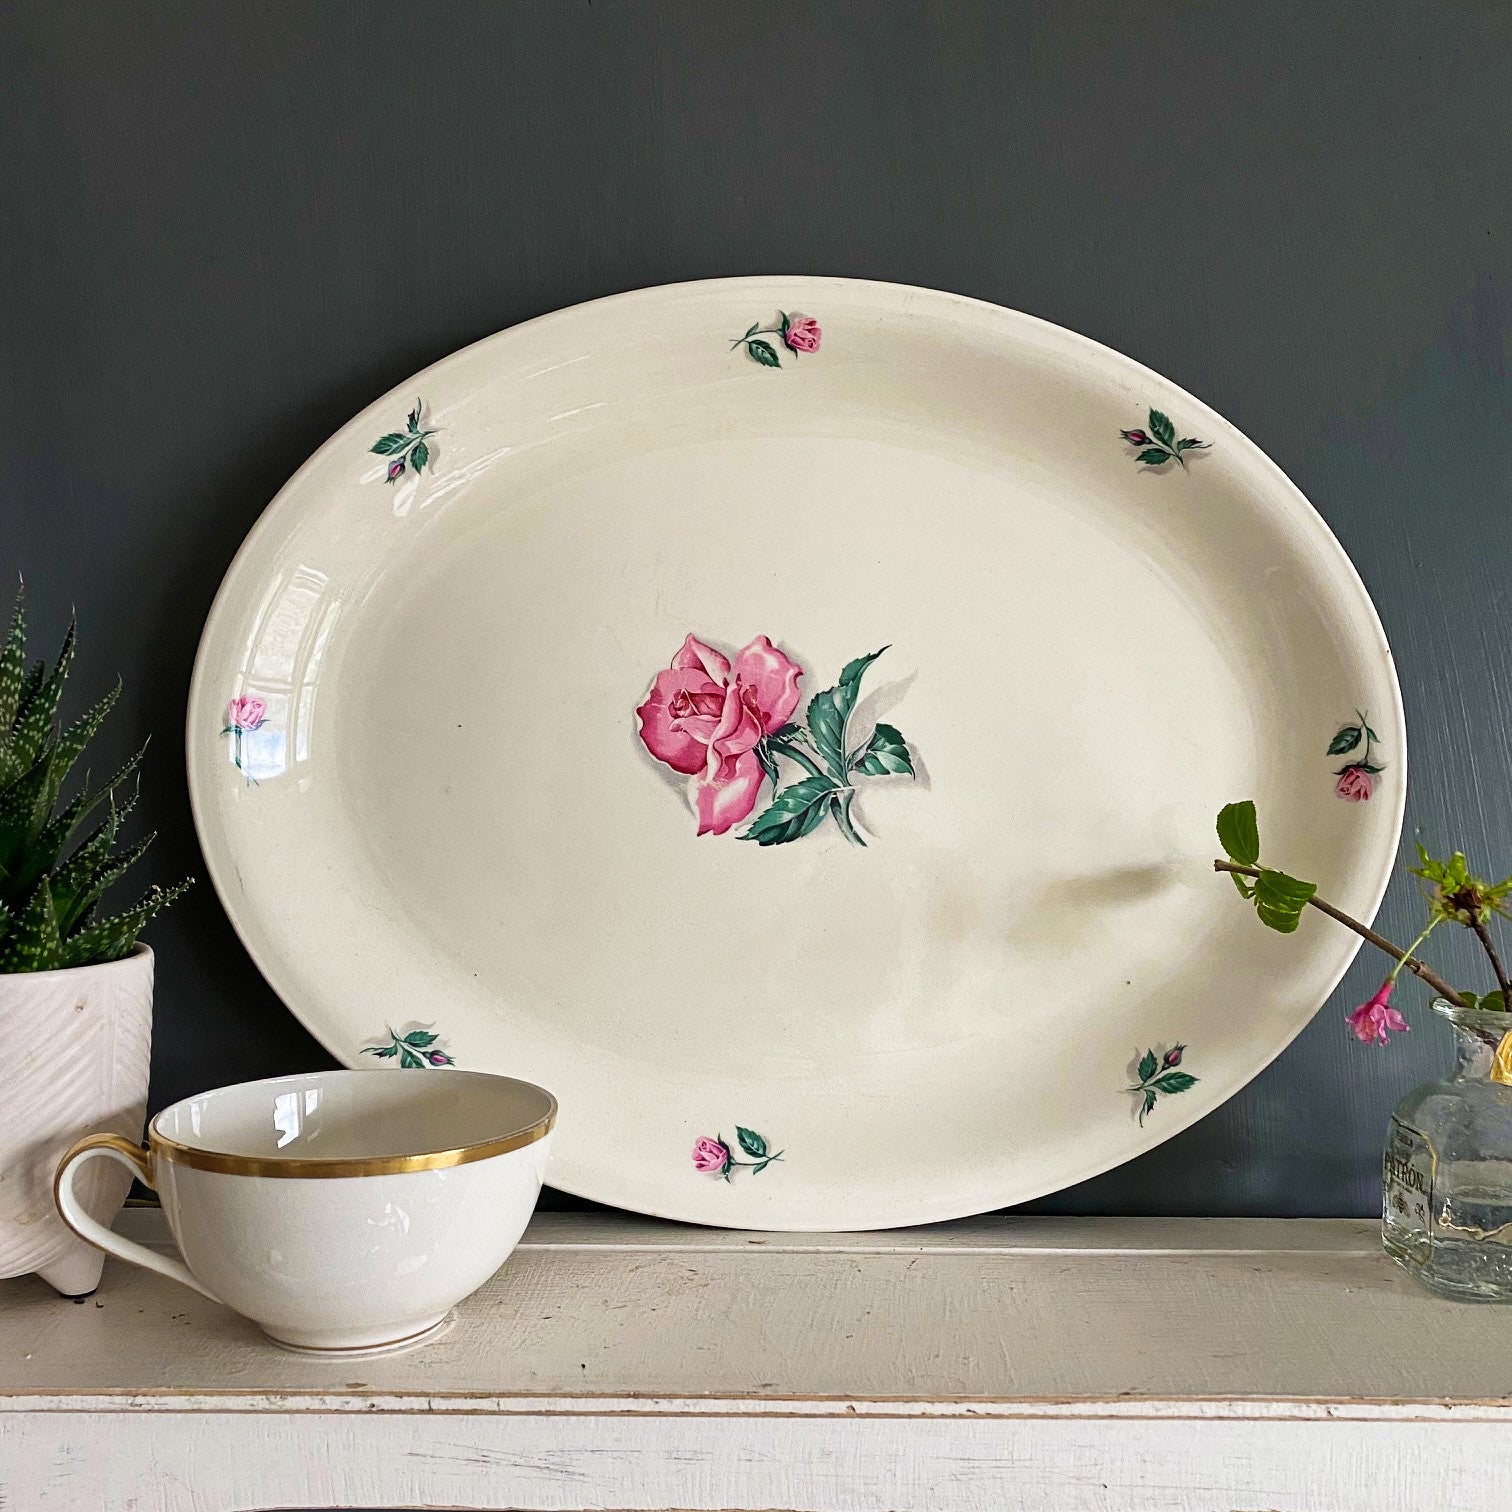 1950s Rhythm Rose Platter - Made By Homer Laughlin - Sold by Household Institute